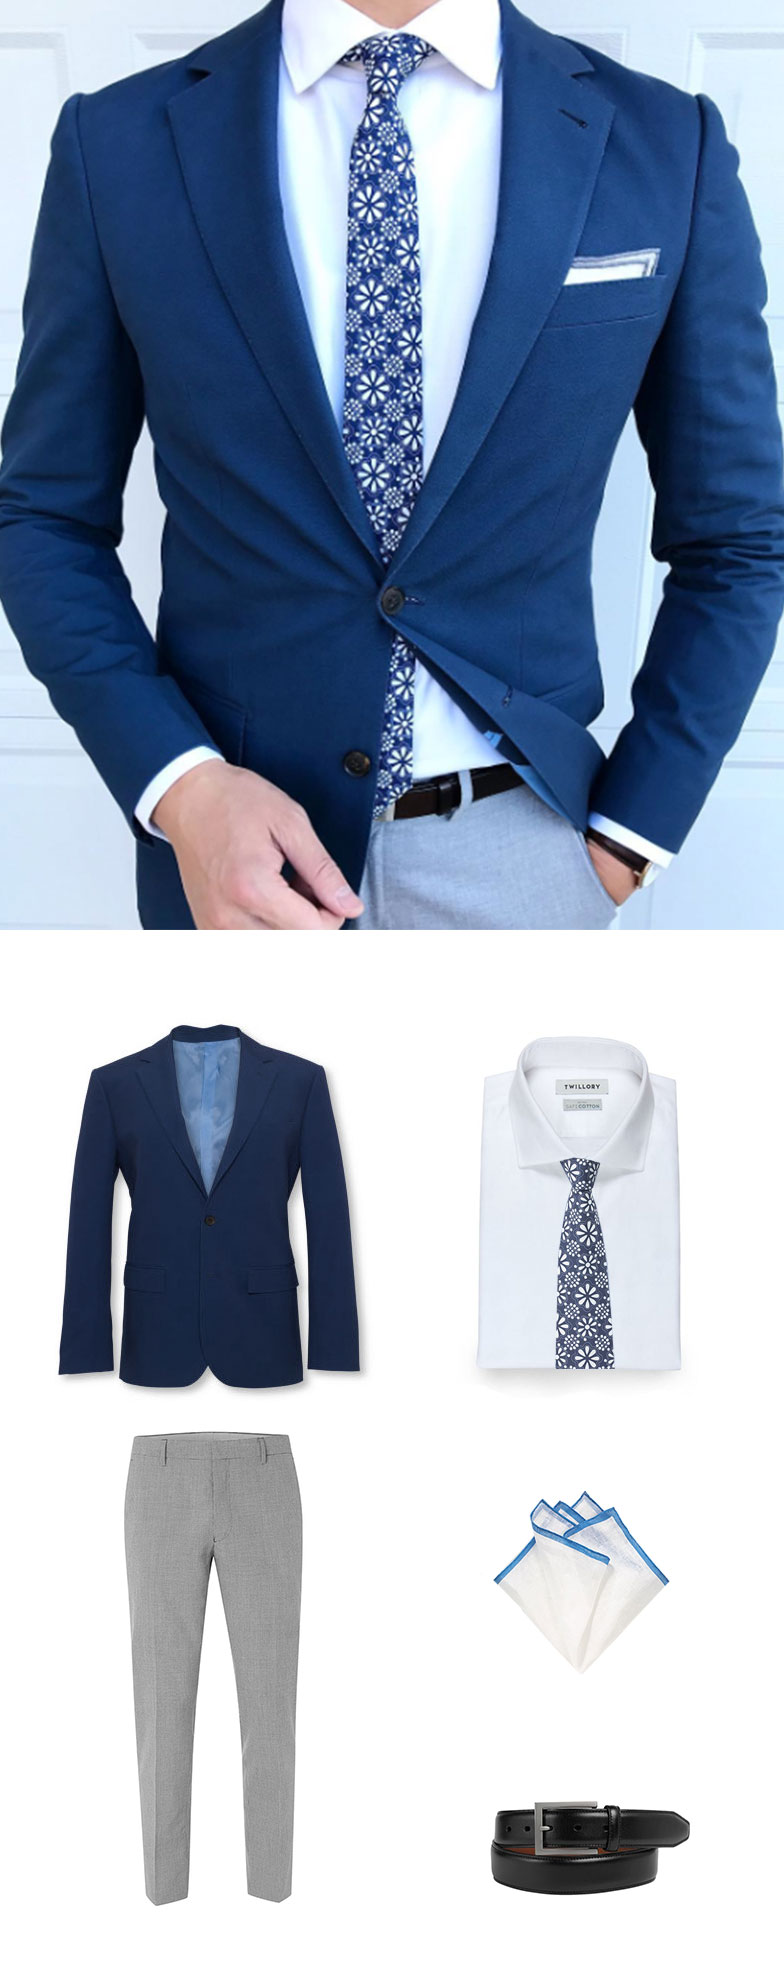 Look Of The Week: Our Mexican Tile Tie in Blue